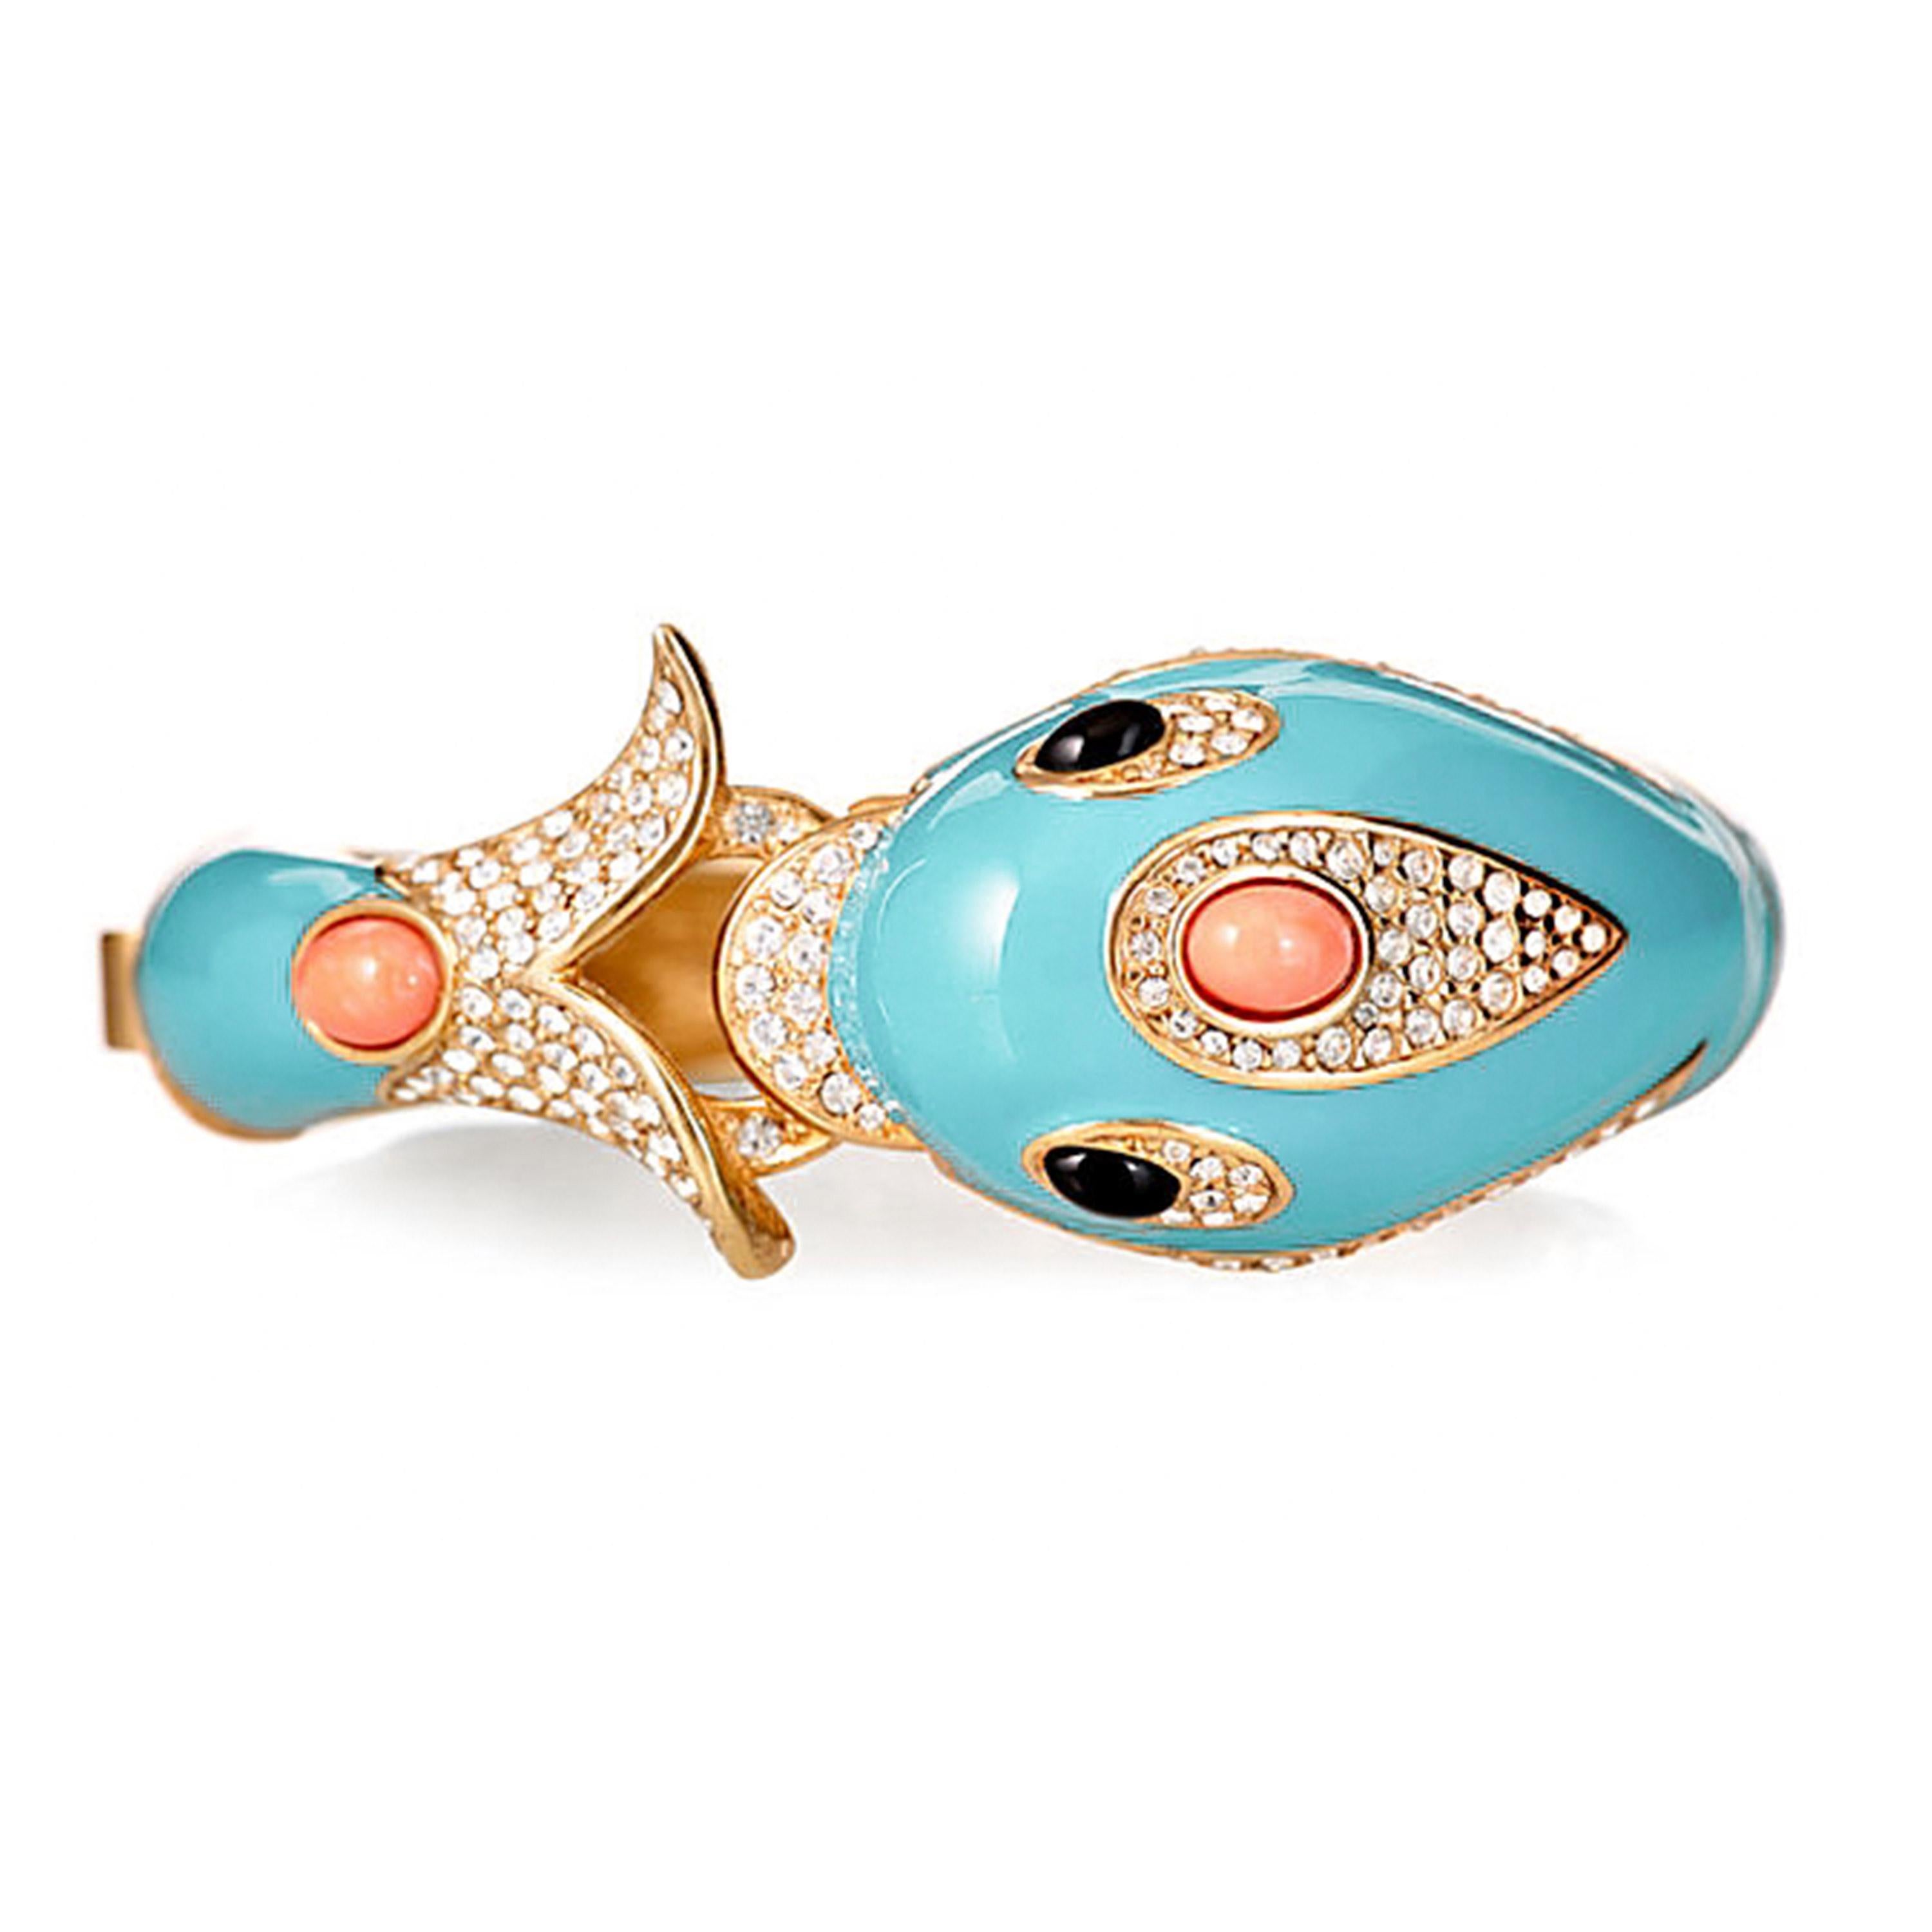 The Turquoise Dolphin bracelet was introduced to CINER’s line in the early 1980’s and was one of the many CINER pieces Elizabeth Taylor collected. A sweet and chic piece, The Dolphin Bracelet is a favorite among many CINER admirers and collectors.